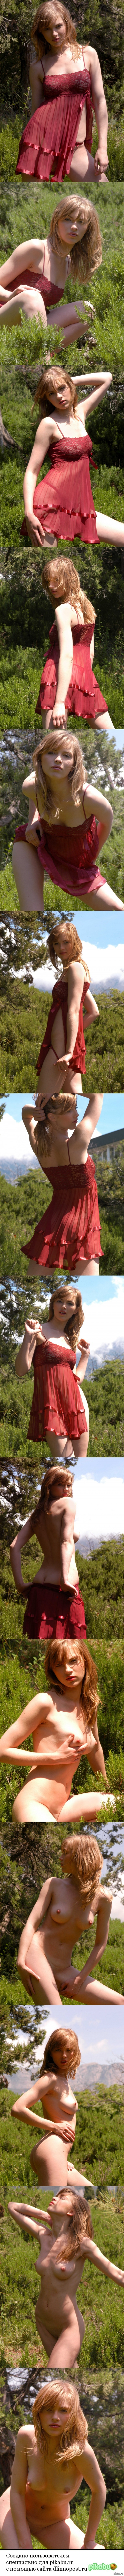 Girl in a red dressing gown. - Girls, Longpost, NSFW, Strawberry, Underwear, Nature